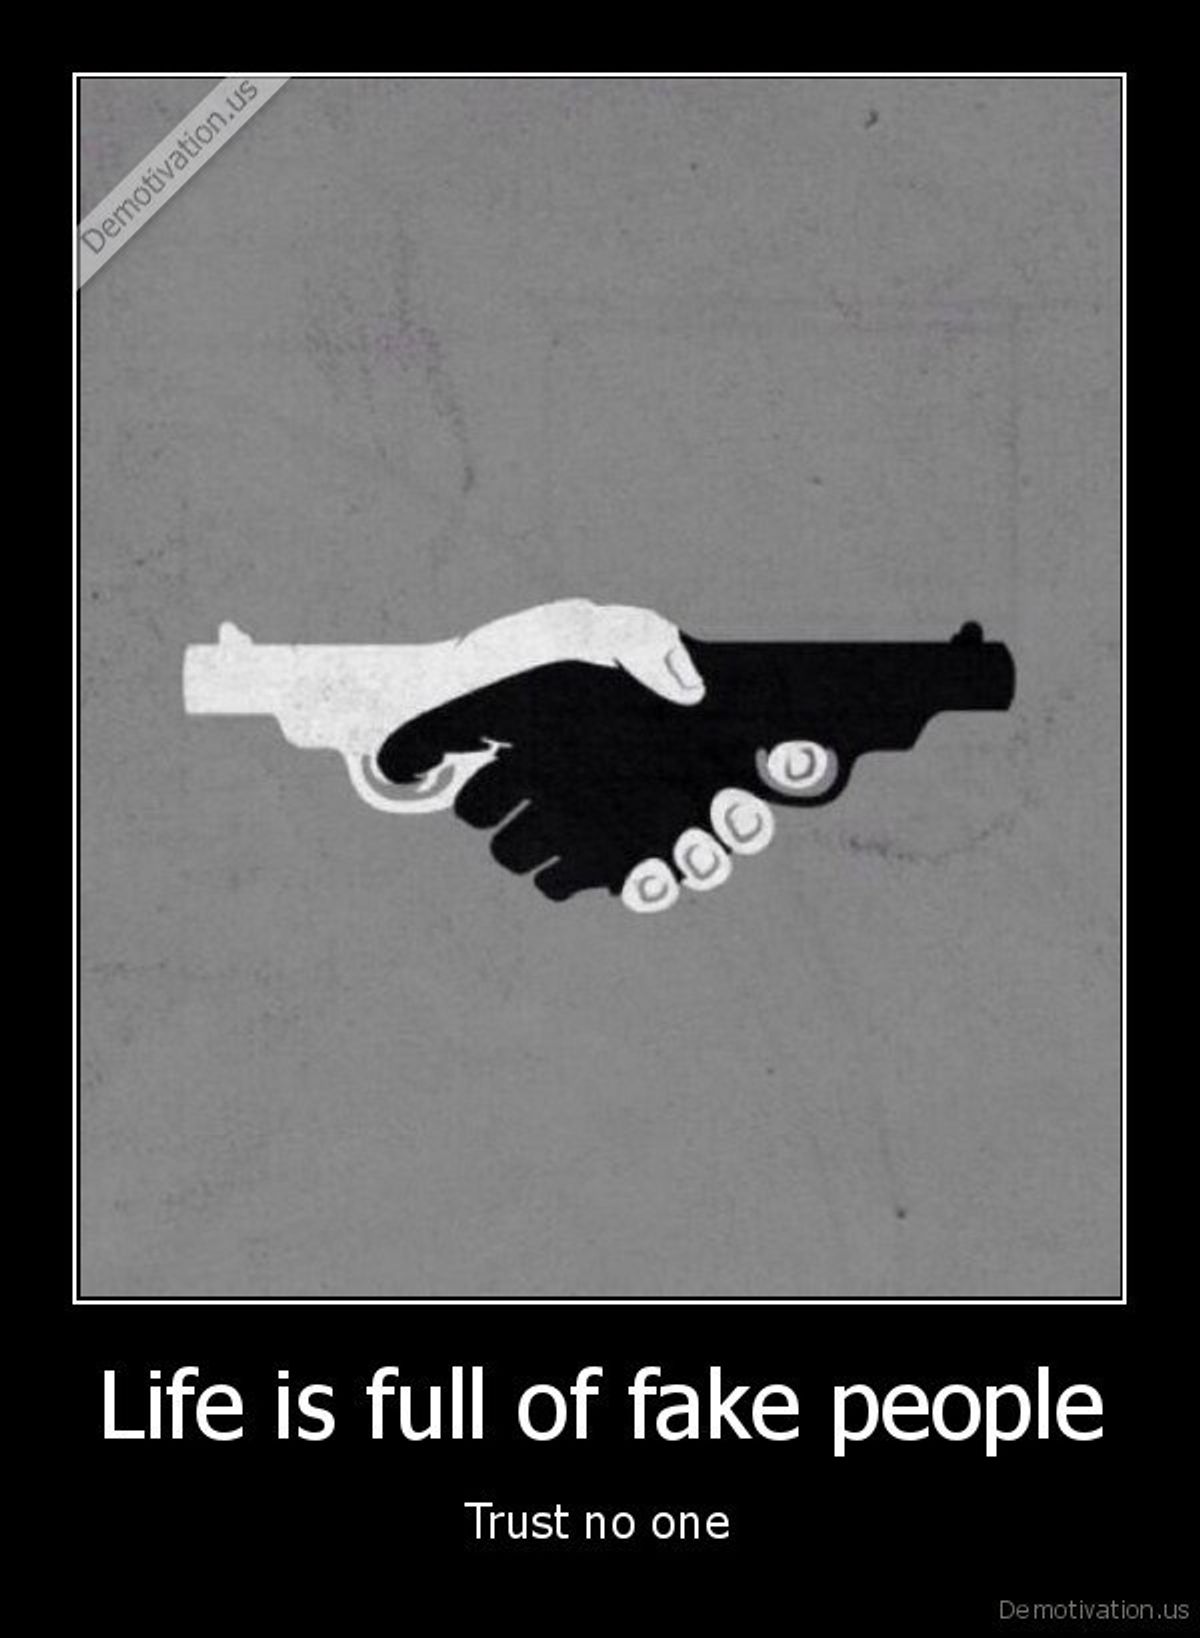 A World of Fakes